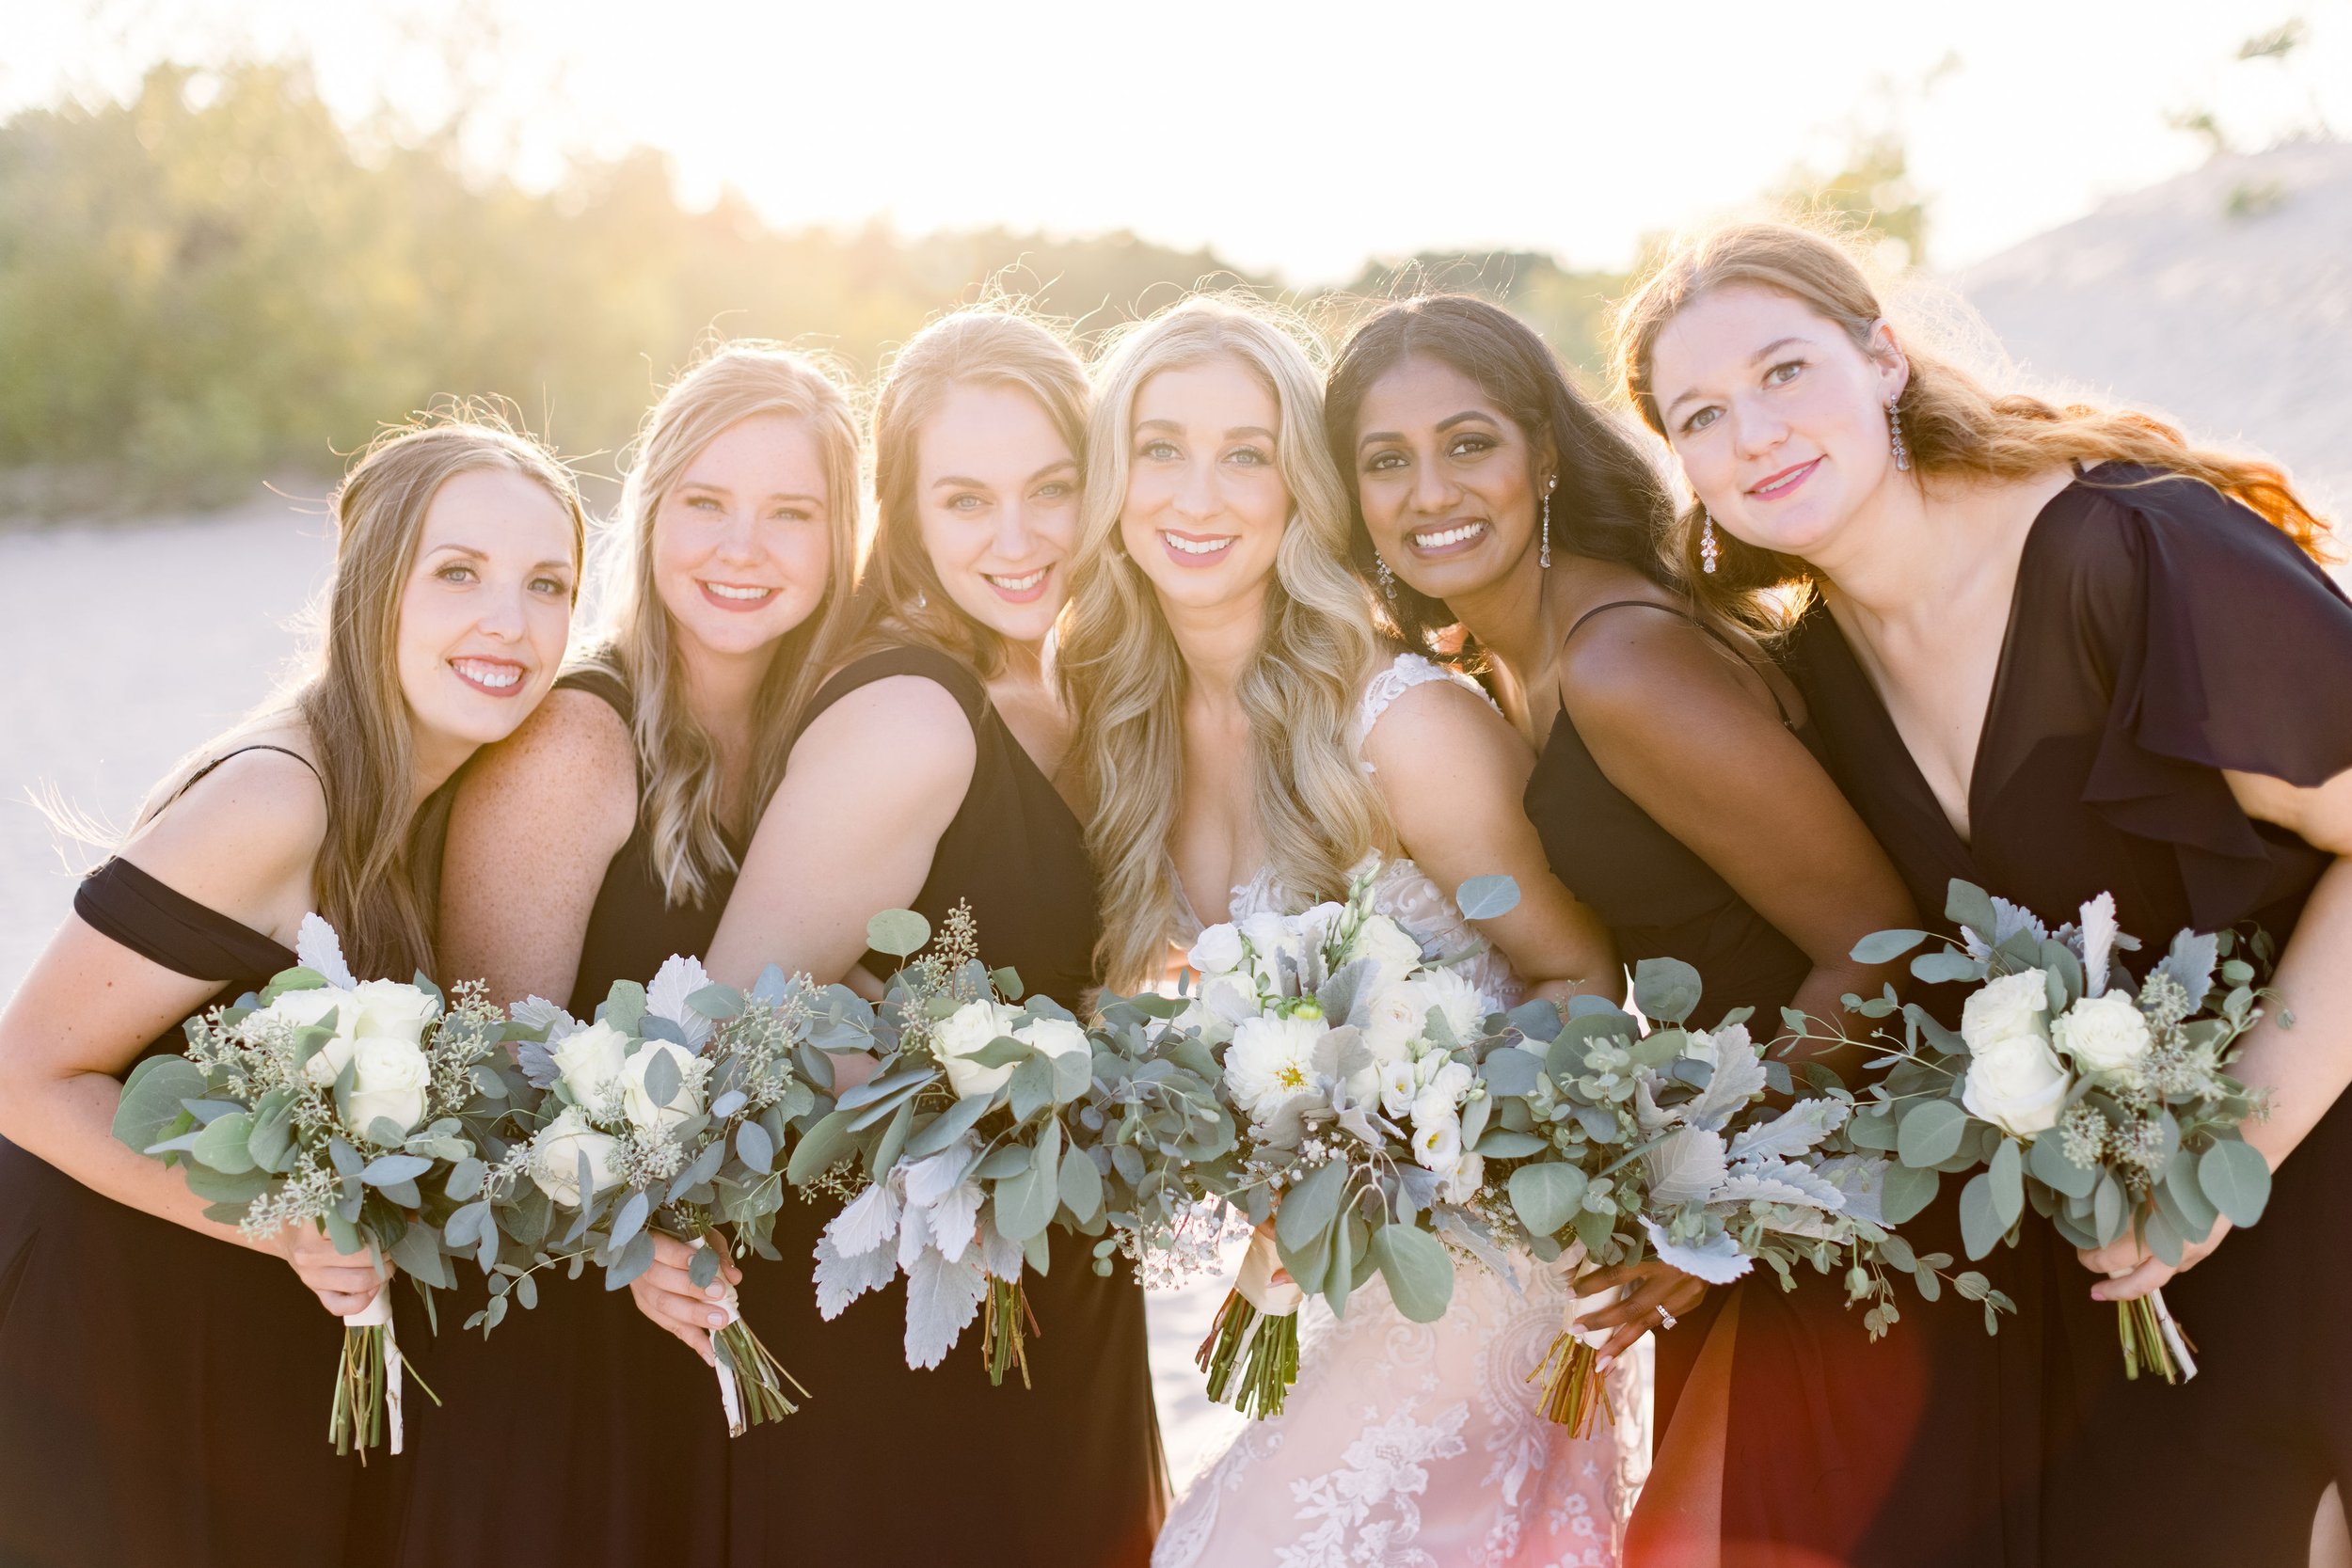  Chelsea Mason Photography captures a bride with her bridesmaids at sunset on the beach. classic wedding colors sunset wedding #ChelseaMasonPhotography #ChelseaMasonWeddings #PrinceEdwardsCountyWeddings #SandbanksWeddings #ONweddingphotographer 